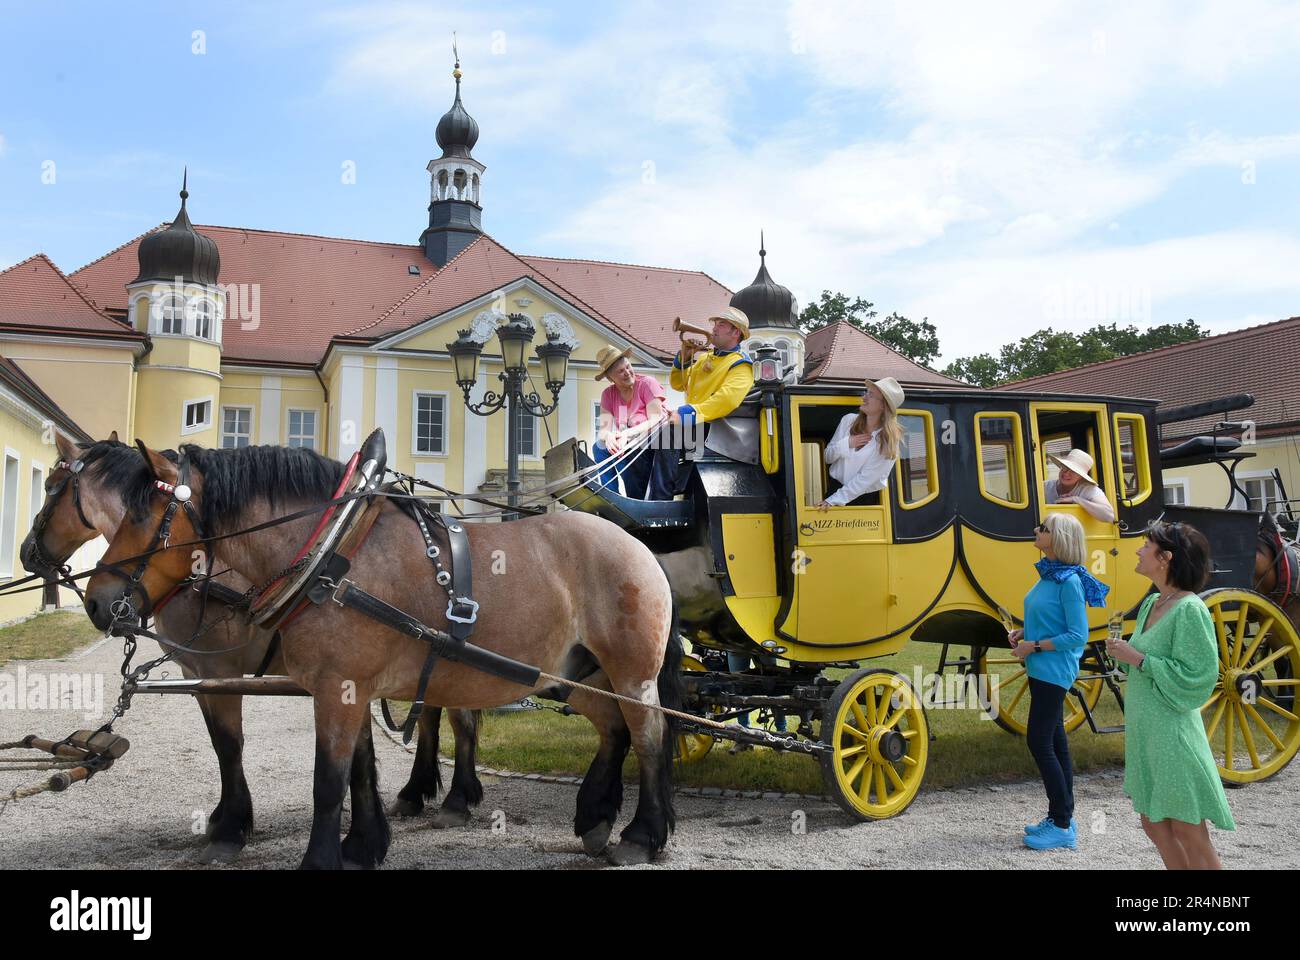 29 May 2023, Saxony, Hohenprießnitz, Bad Düben: On a stagecoach in the castle courtyard of the baroque castle Hohenprießnitz, coach driver Dietmar Dietze blows the post horn for the onward journey after a break. Every year at Whitsun, friends and acquaintances with stagecoaches, Landauers, wagonettes and hunting carriages meet with Siegfried Händler from the carriage driving service Bad Düben for a day trip to the surrounding area in northern Saxony. Photo: Waltraud Grubitzsch/dpa Stock Photo